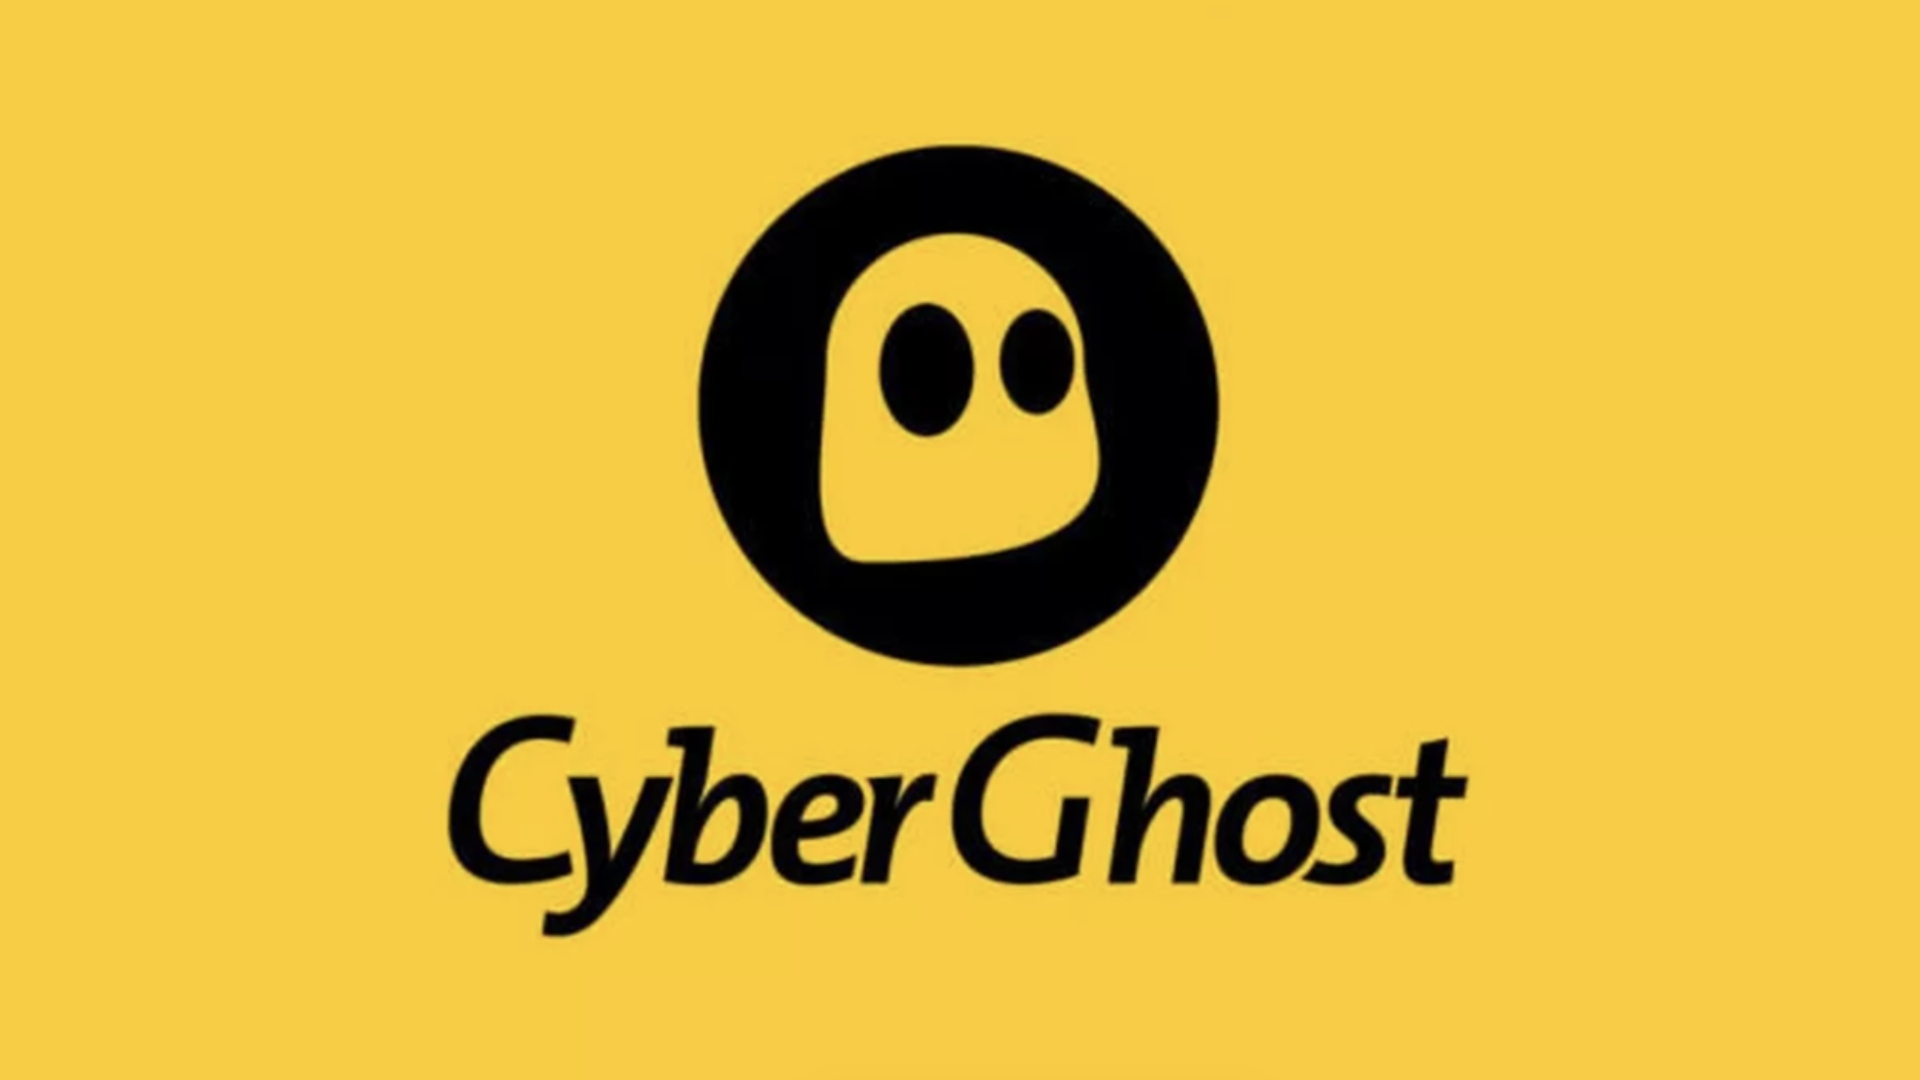 Best VPN for iPhone - CyberGhost. Image shows the company logo.